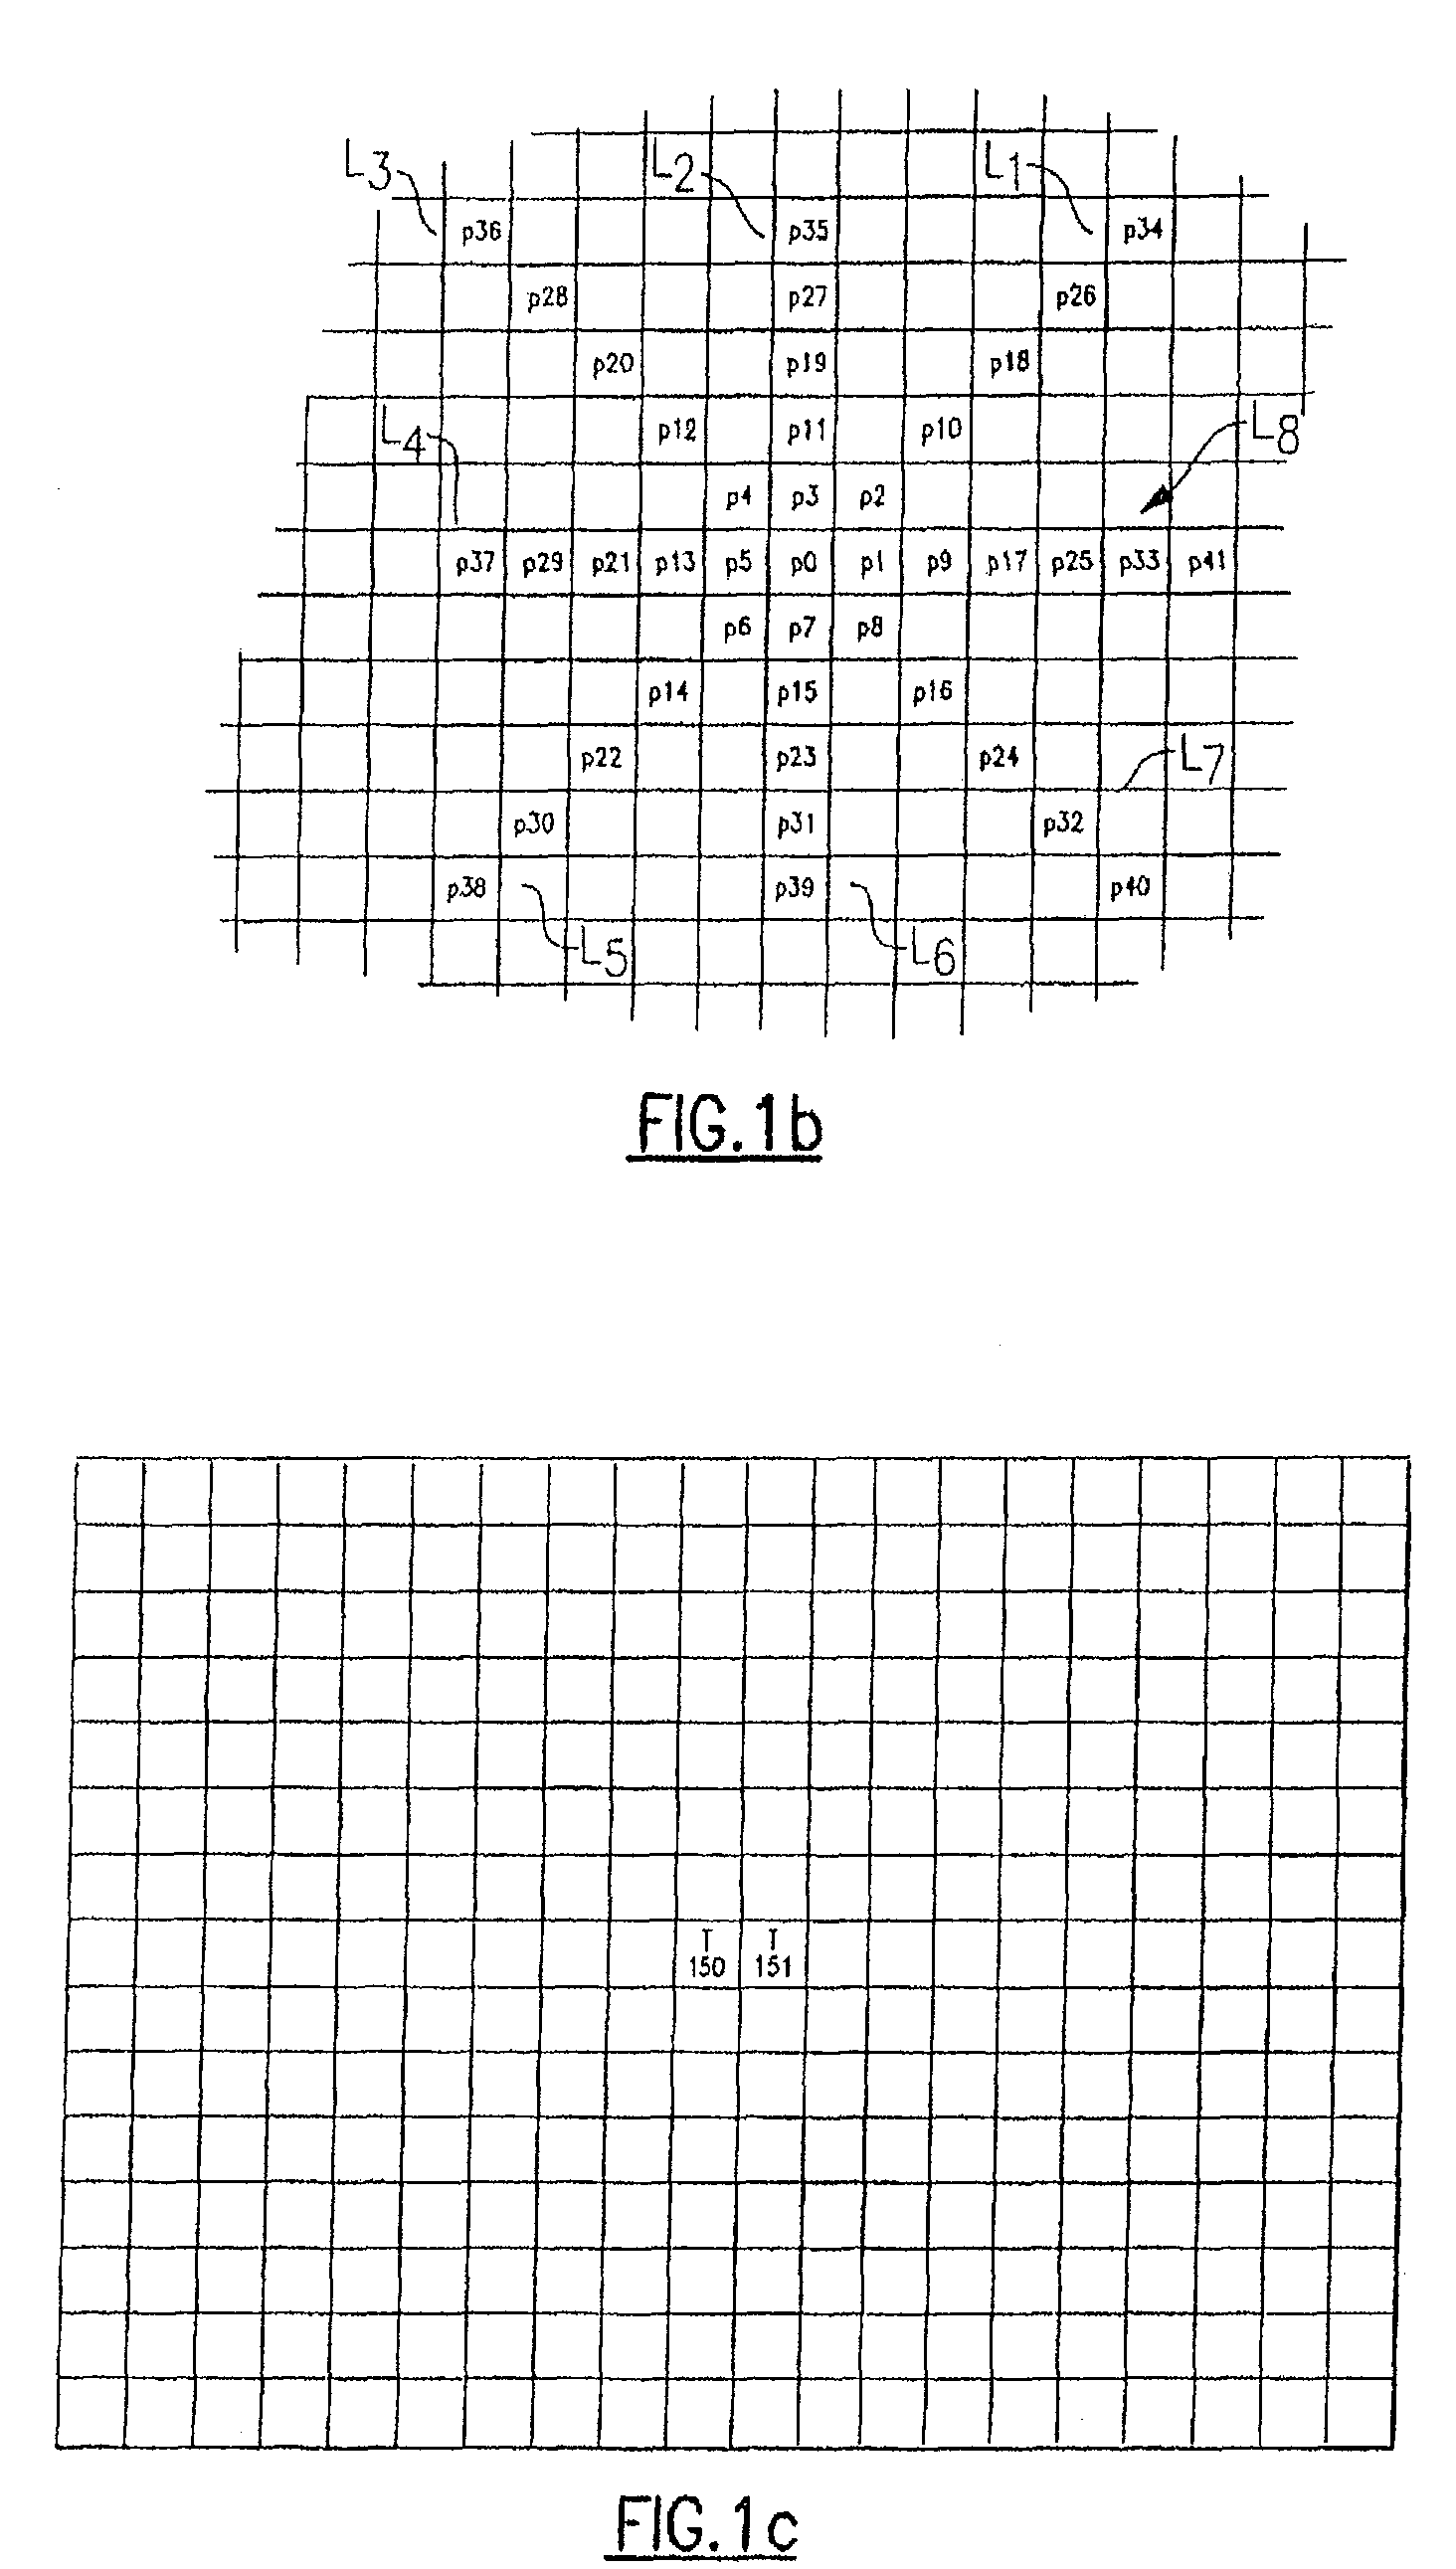 Method for omnidirectional processing of 2D images including recognizable characters